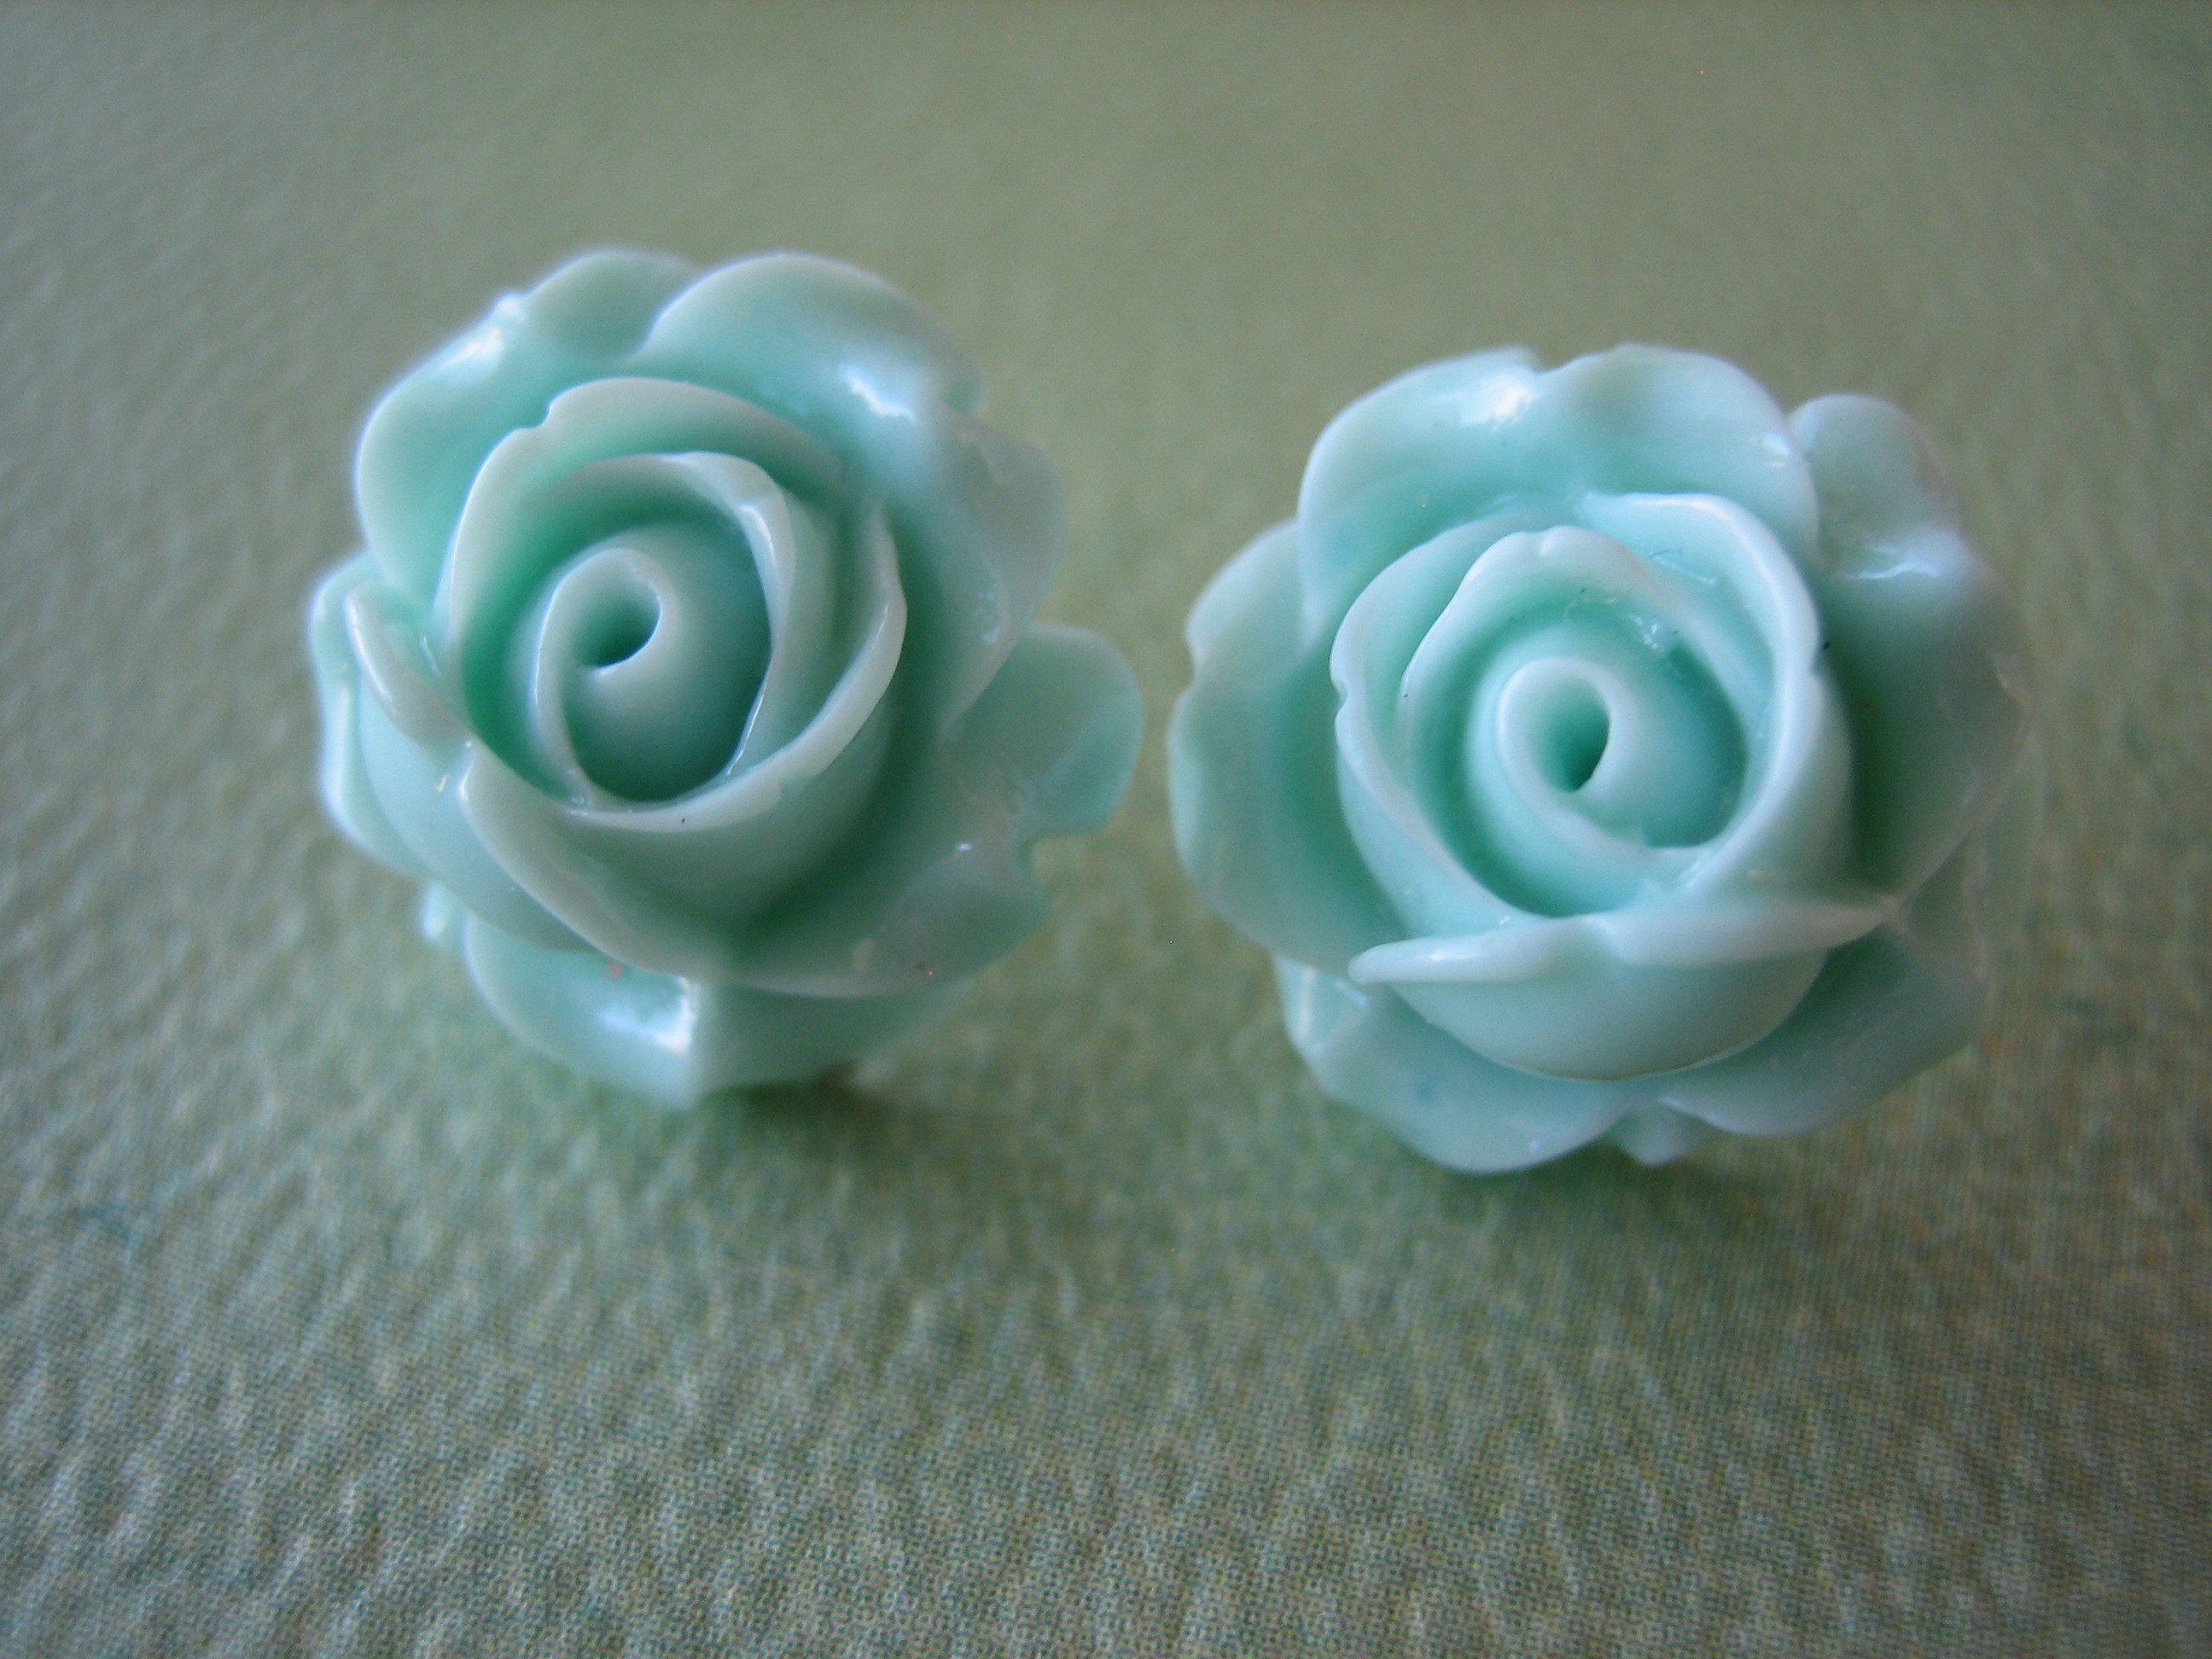 Adorable Cabbage Rose Earrings - Aqua - Free Standard US Shipping ...